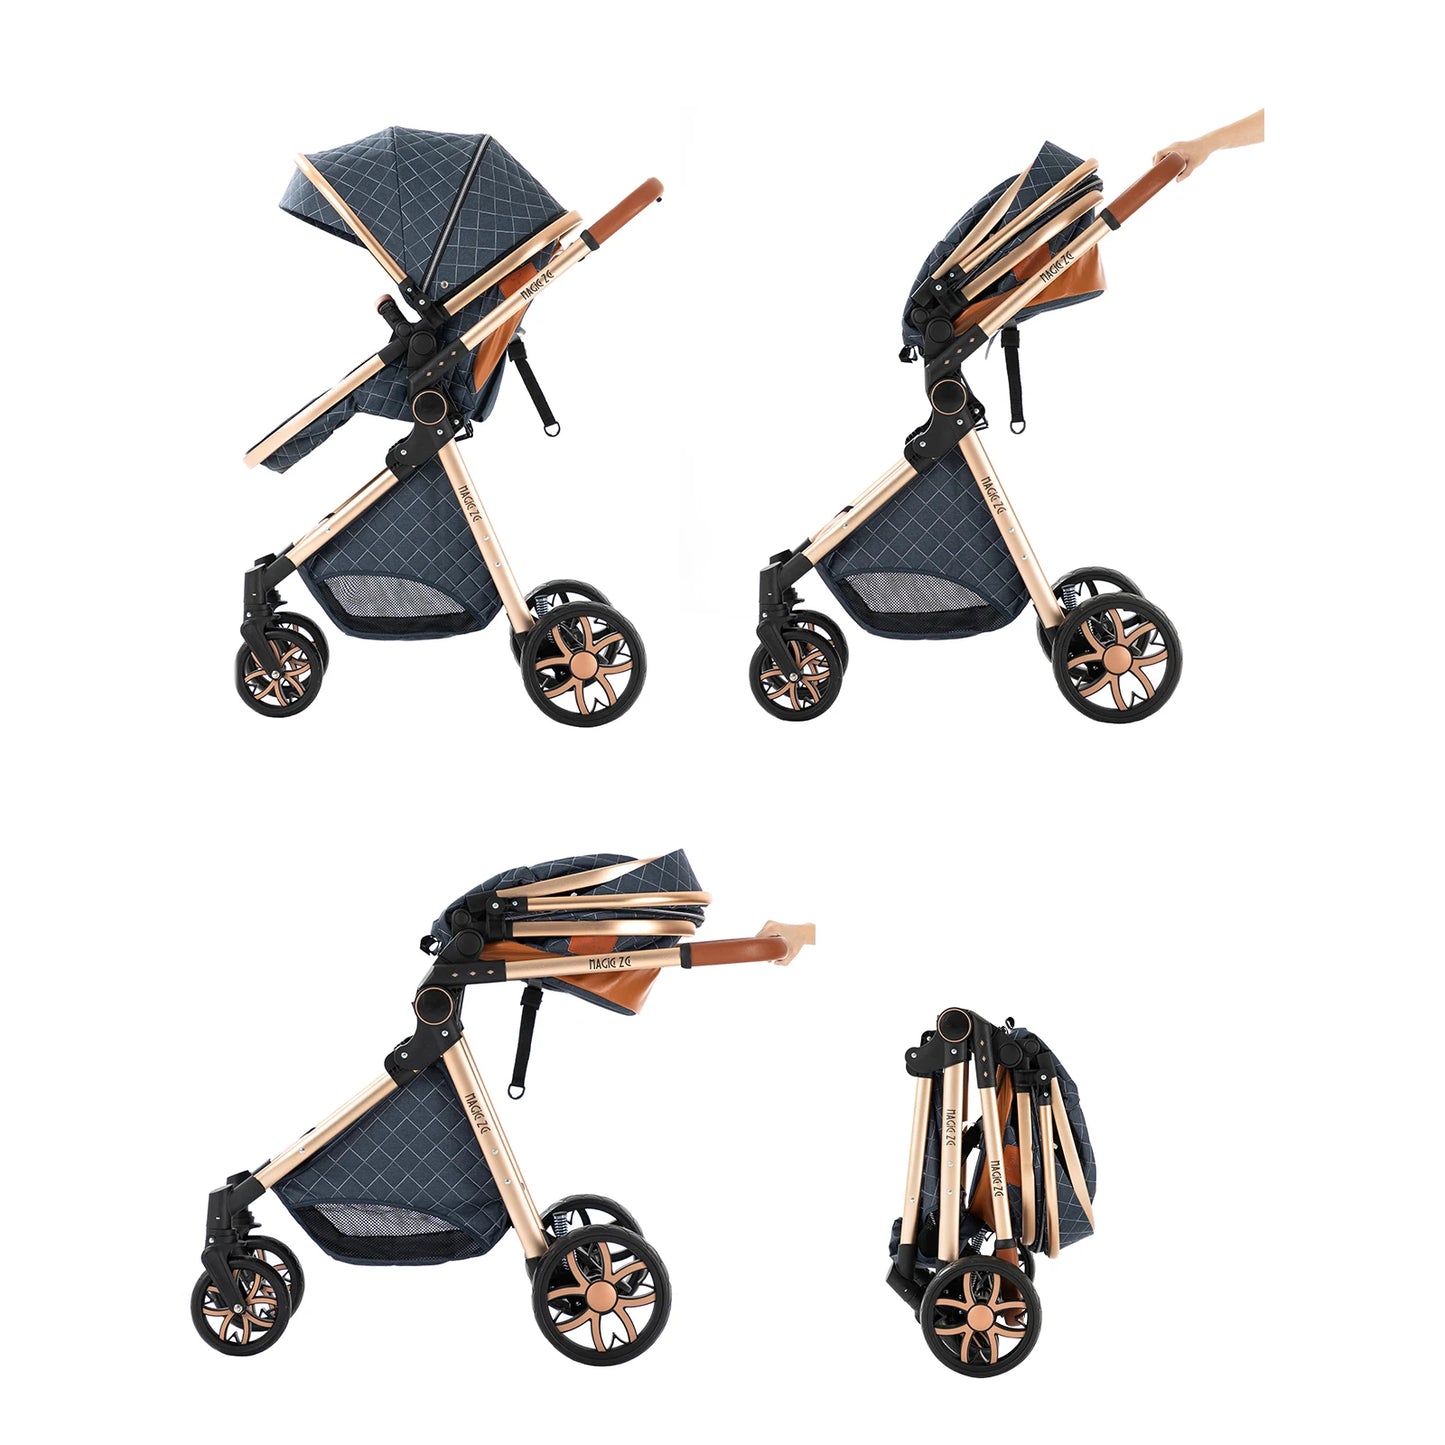 Luxury Baby Stroller 2 in 1 Foldable Stroller and Newborn Baby Bassinet